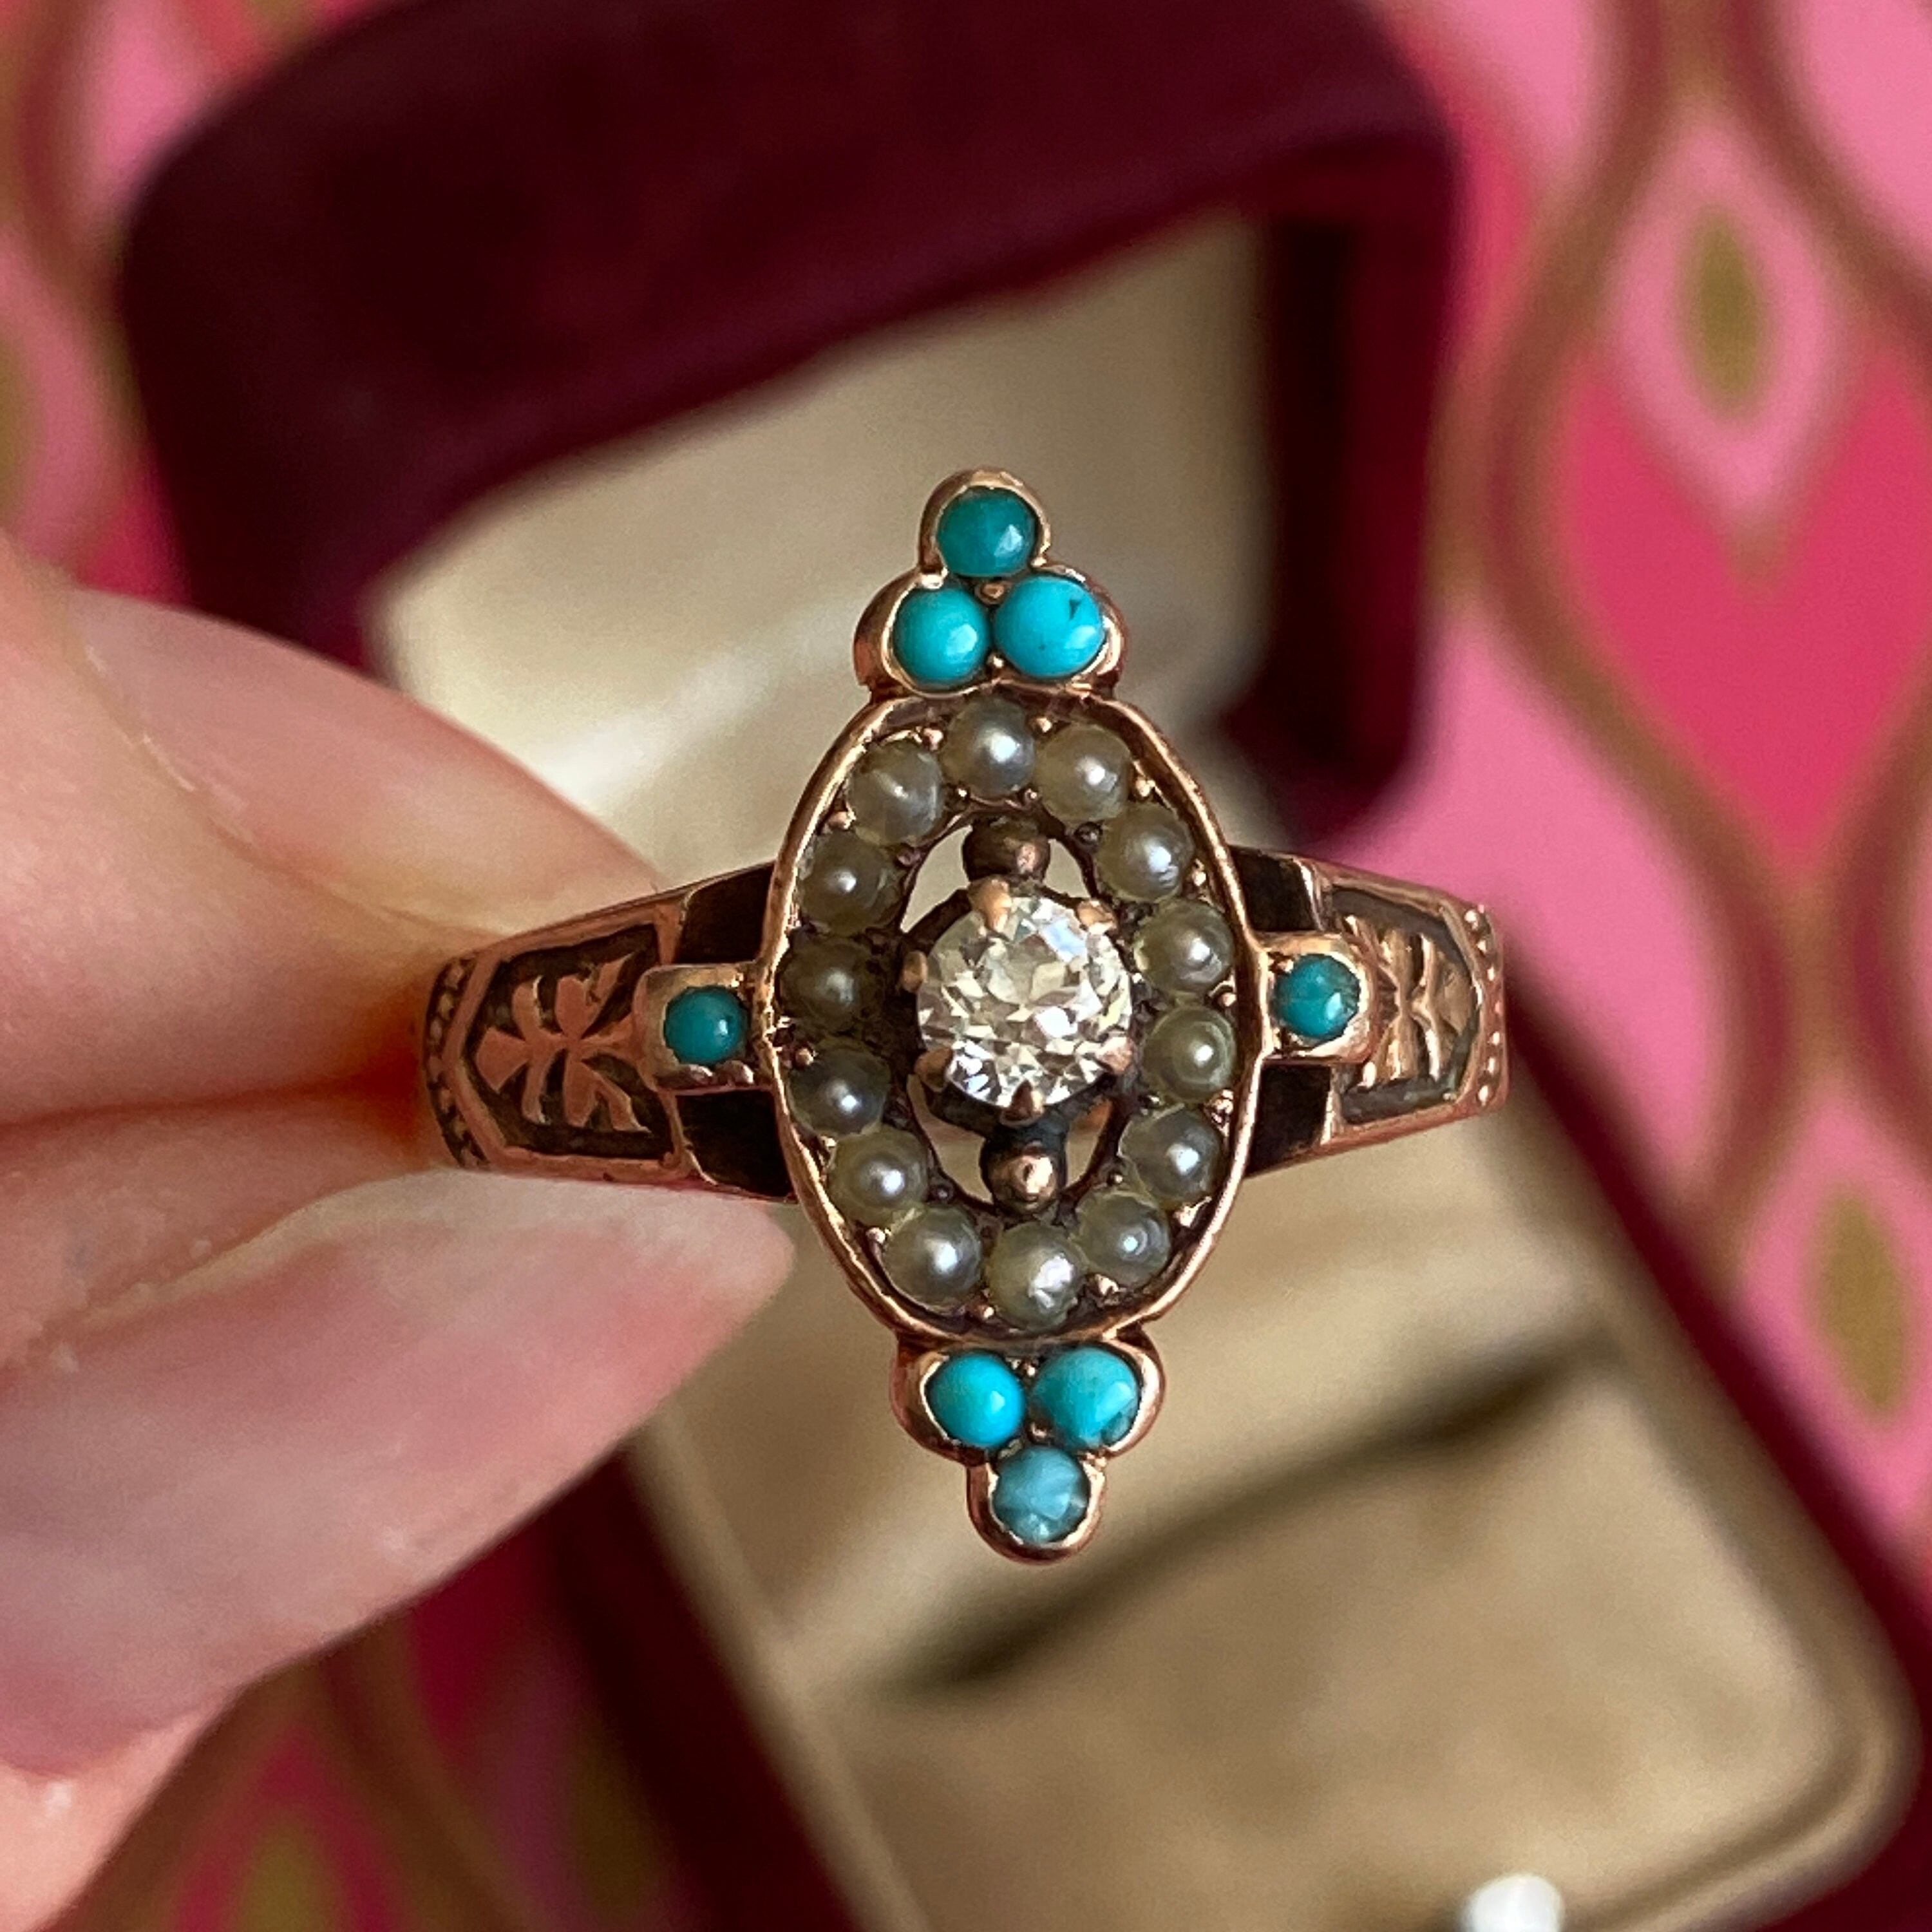 Antique Emerald & Seed Pearl Ring crafted in 15k Gold. Circa 1800s.  Gorgeous!